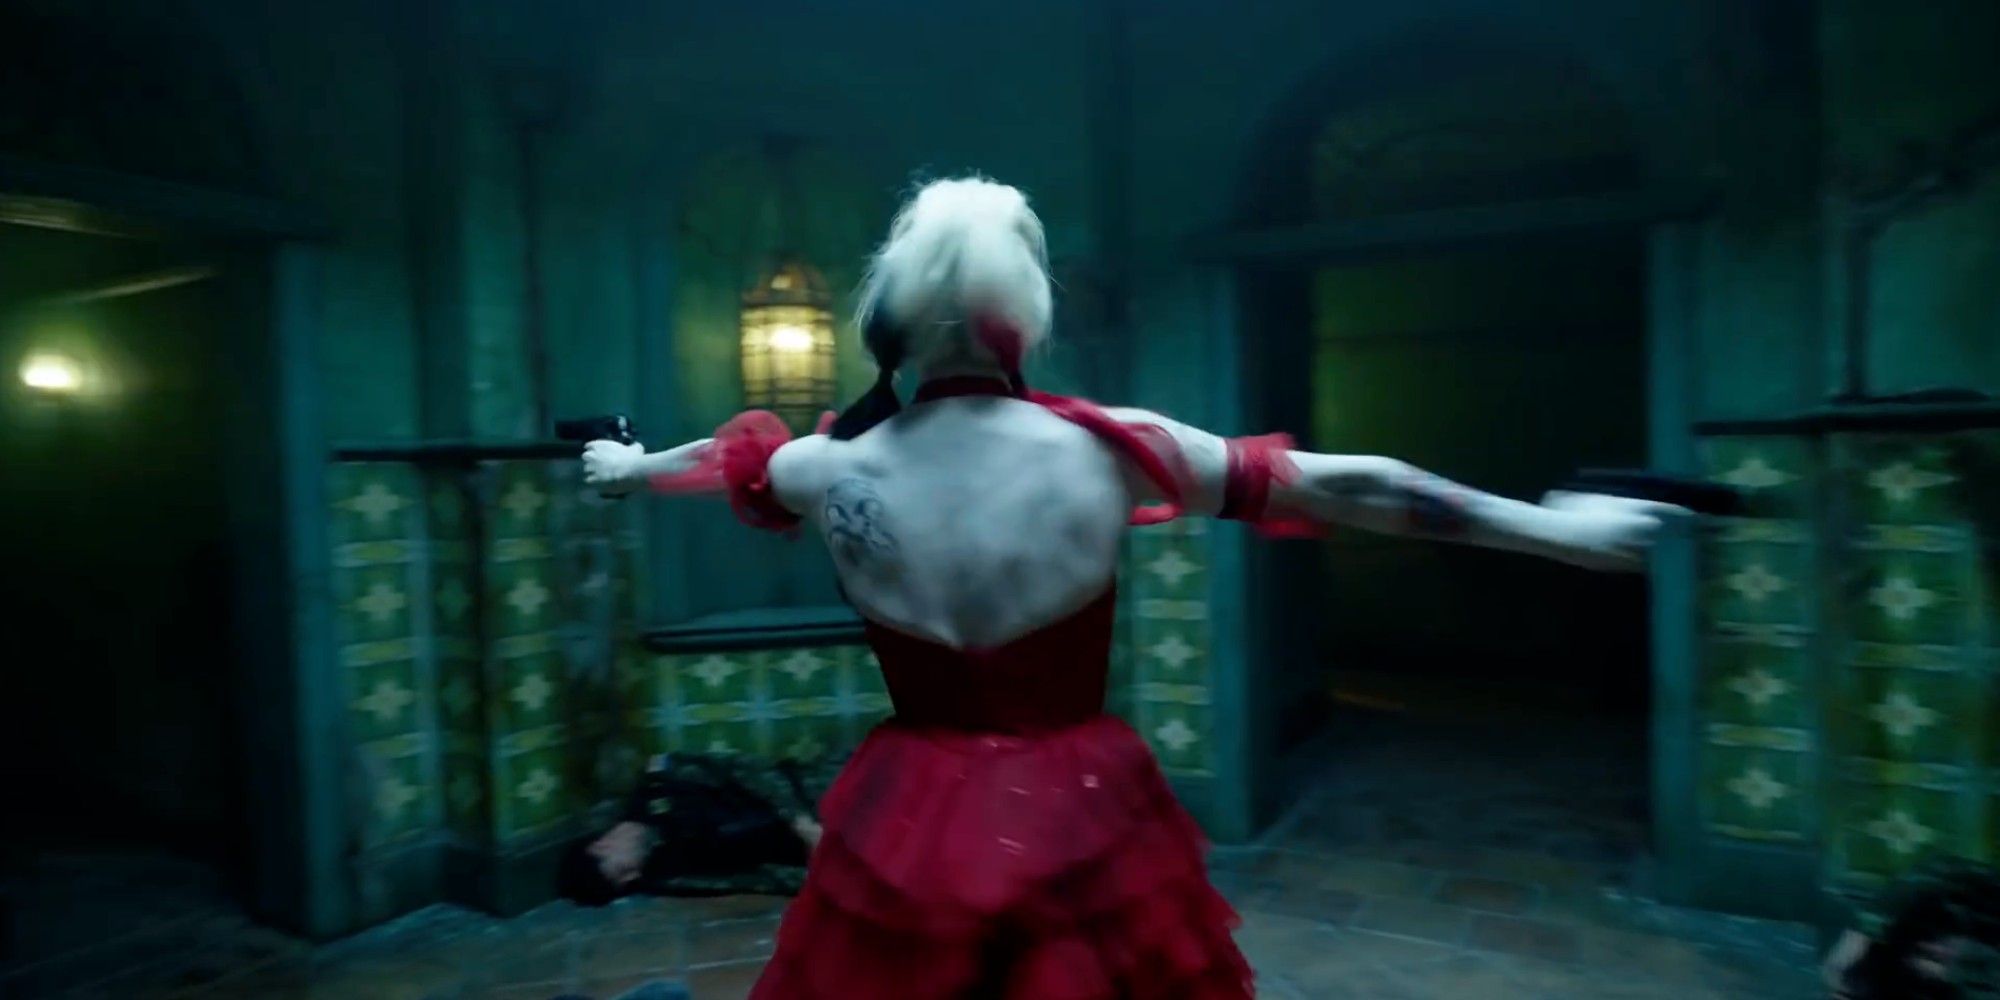 Every Real Screenshot From The Suicide Squad (Not Behind The Scenes)